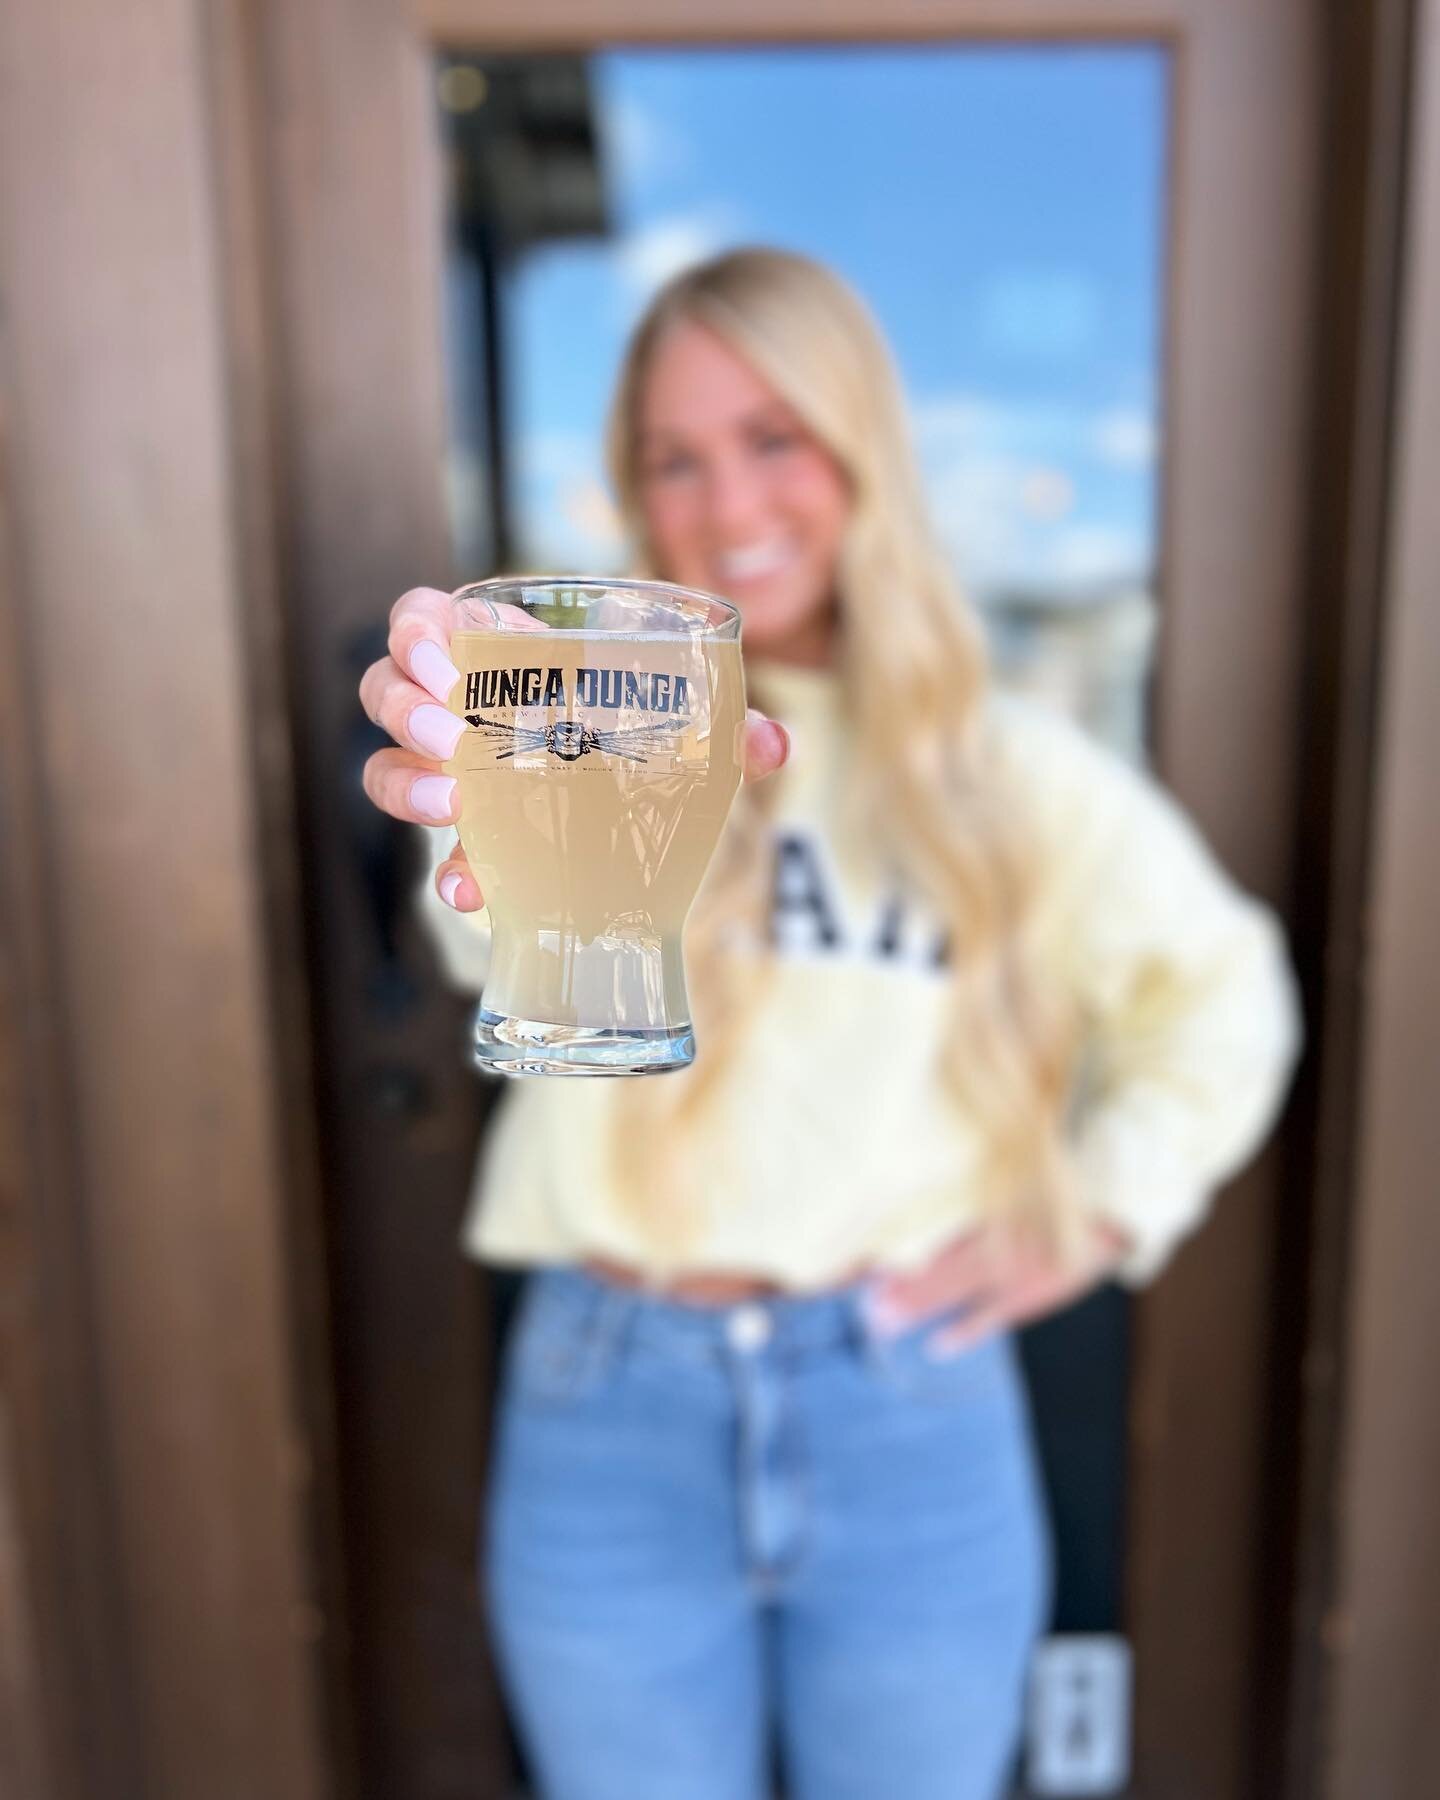 Happy Graduation weekend @uidaho! 

We&rsquo;ve got live music tonight and tomorrow to party to. So bring the whole fam for dinner! We also have kegs you can buy for your bbq&rsquo;s and grad parties. 

Cheers to you class of 2023 🍻🎓